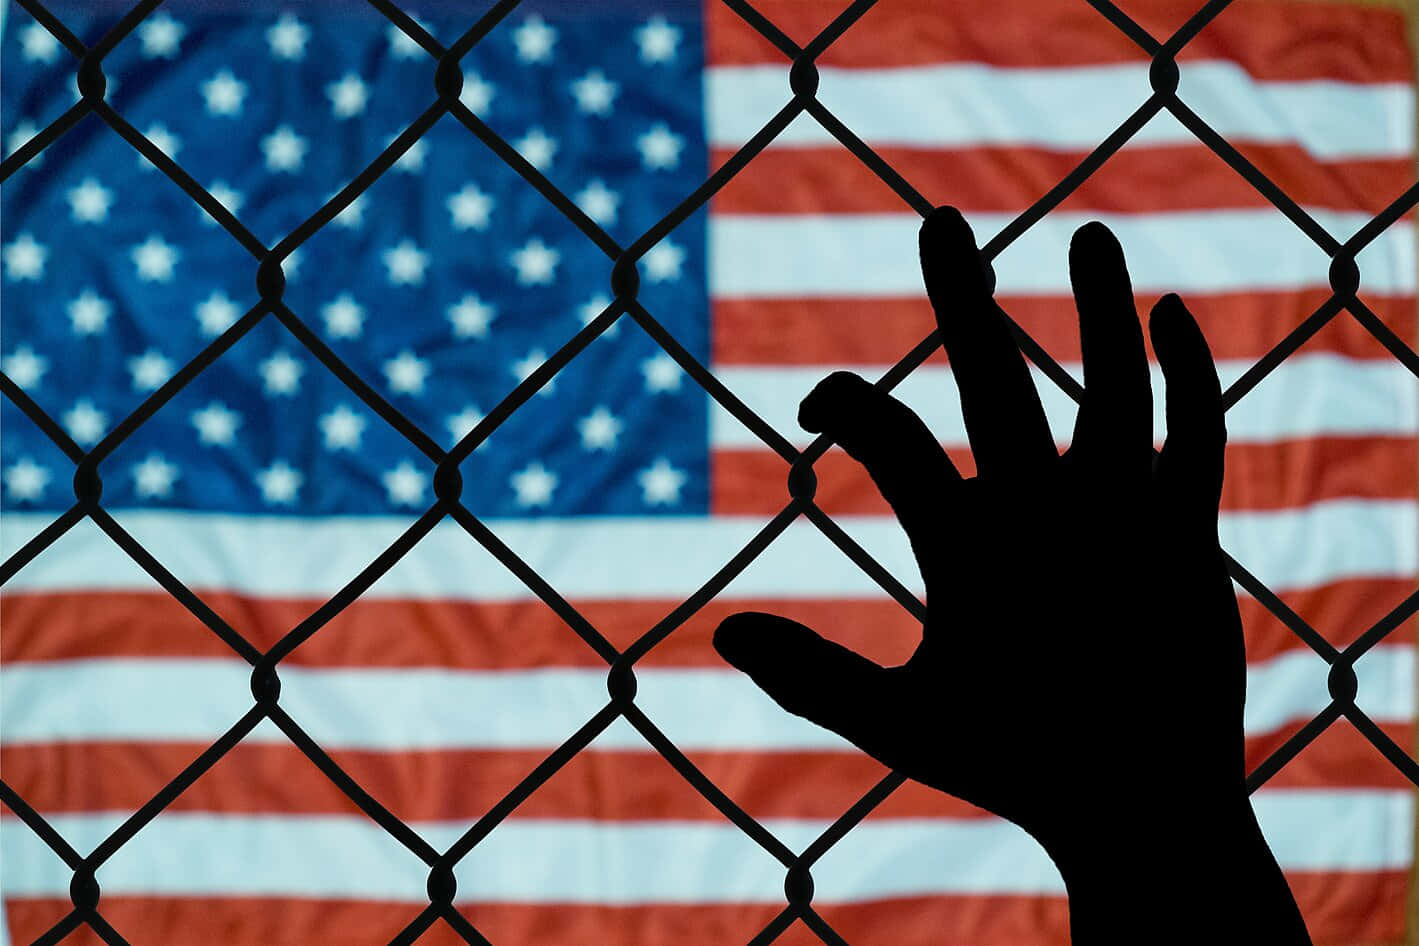 A Hand Reaching Out Of A Chain Link Fence